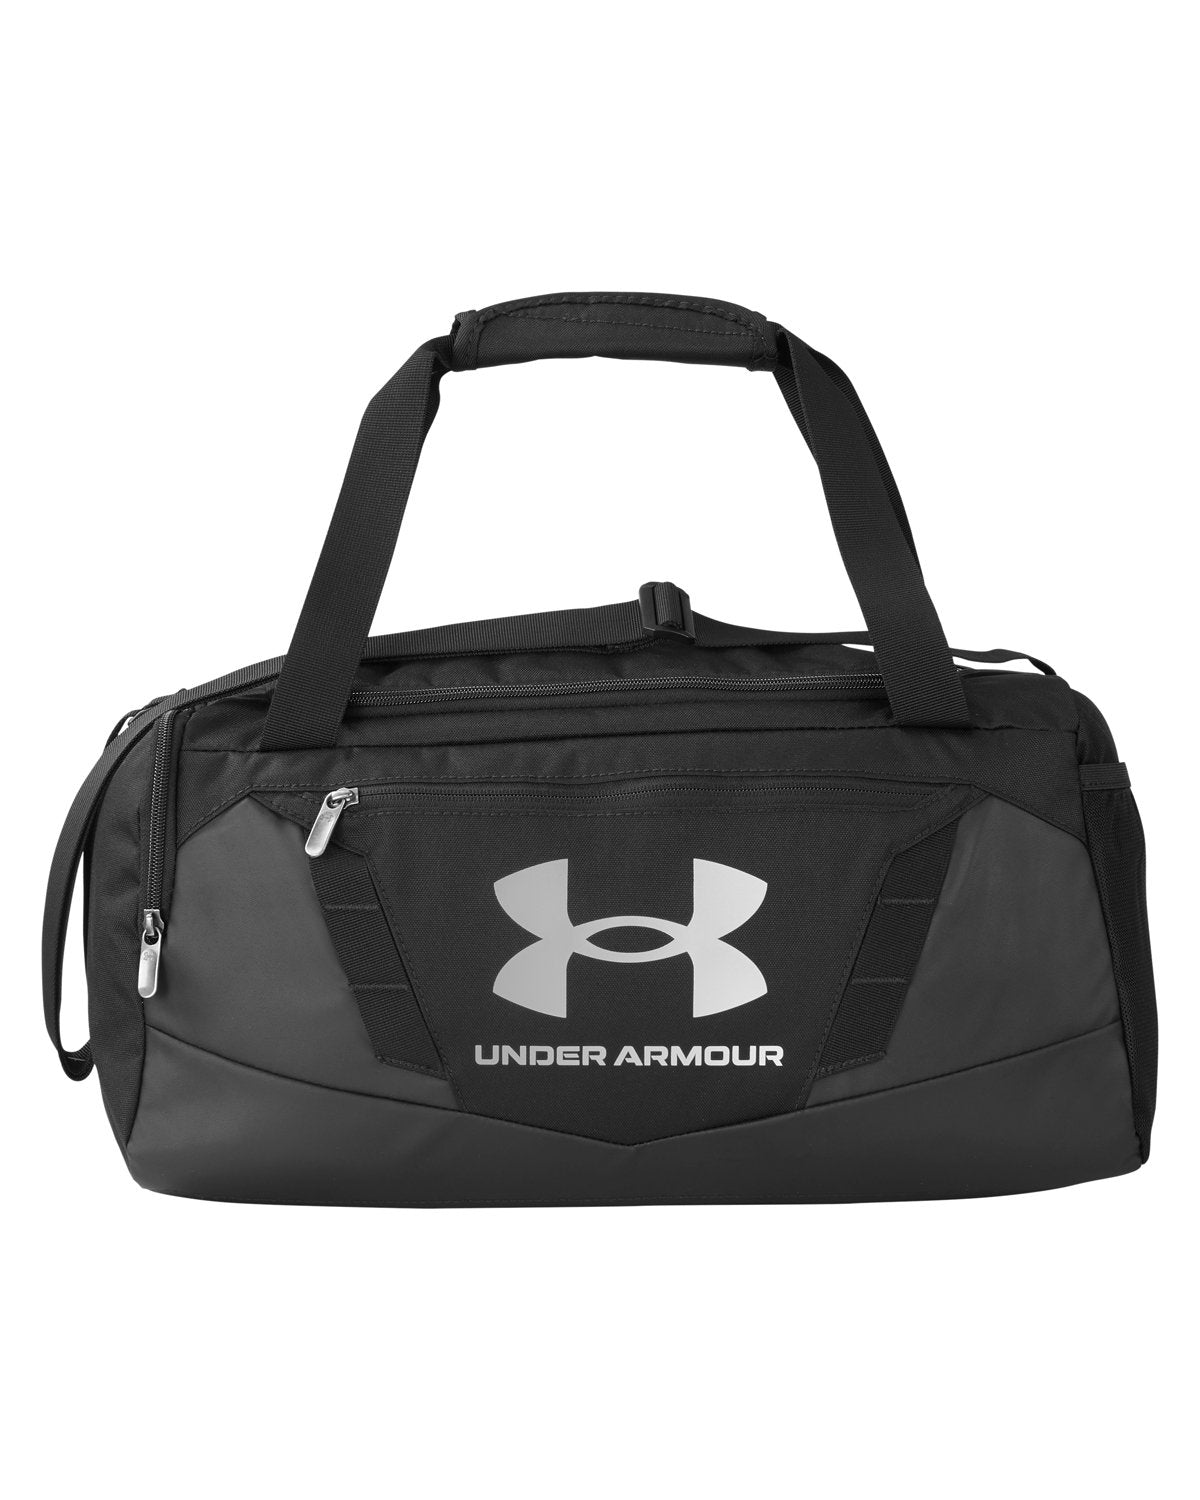 Under Armour Black/ Mate Silver 1369221 